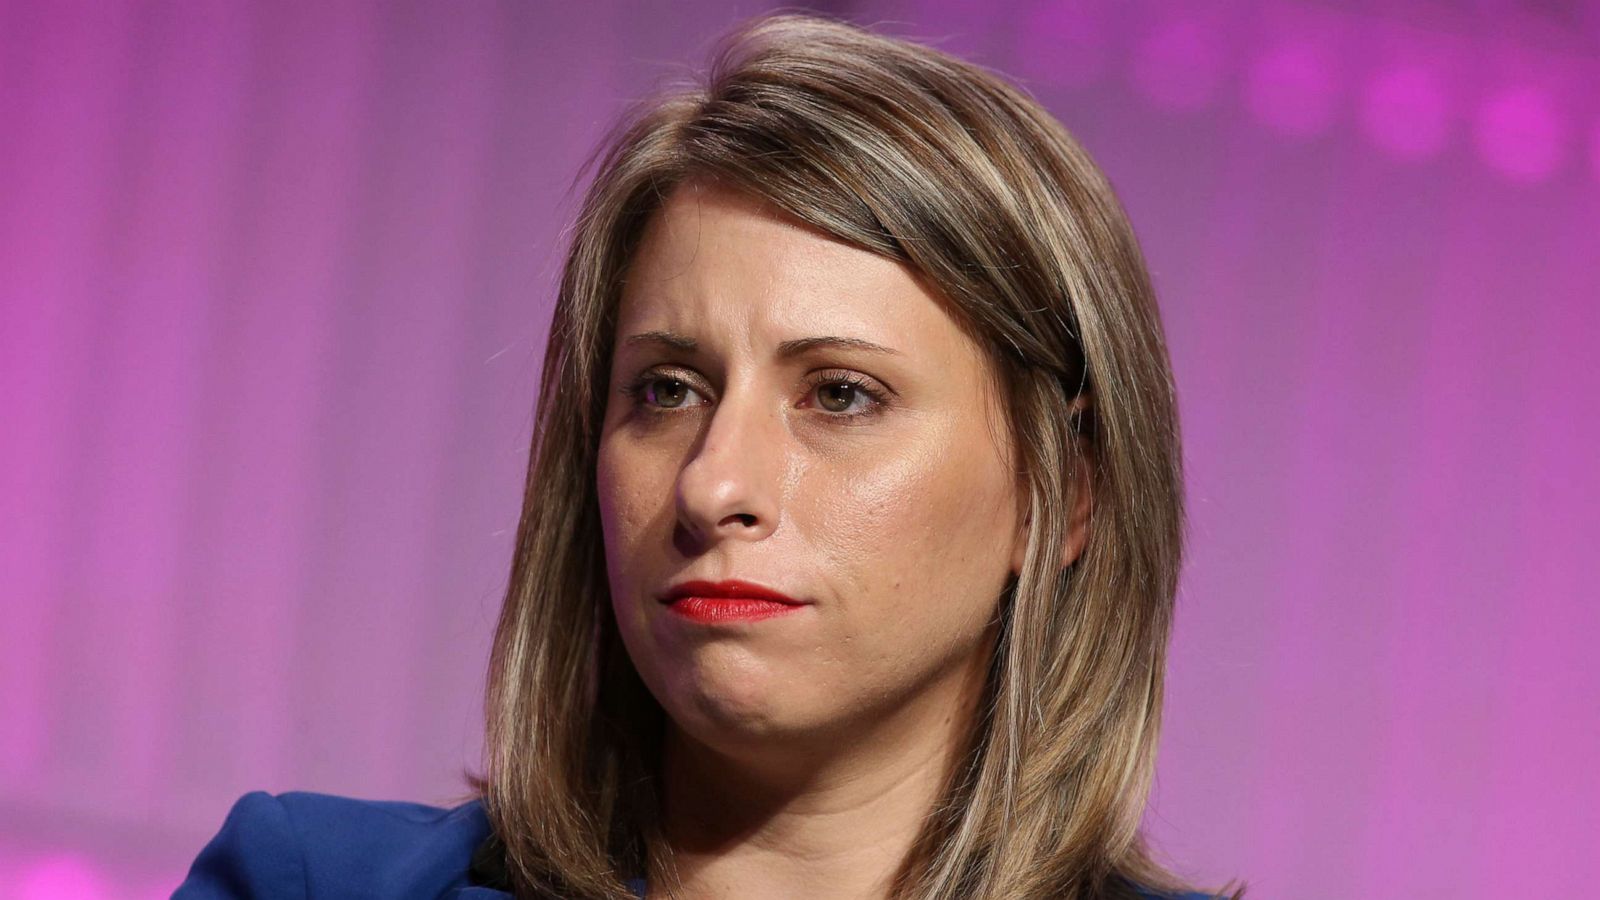 Hd Lantry Sex - Former Rep. Katie Hill breaks silence months after resigning from Congress:  'I made the right call' - Good Morning America